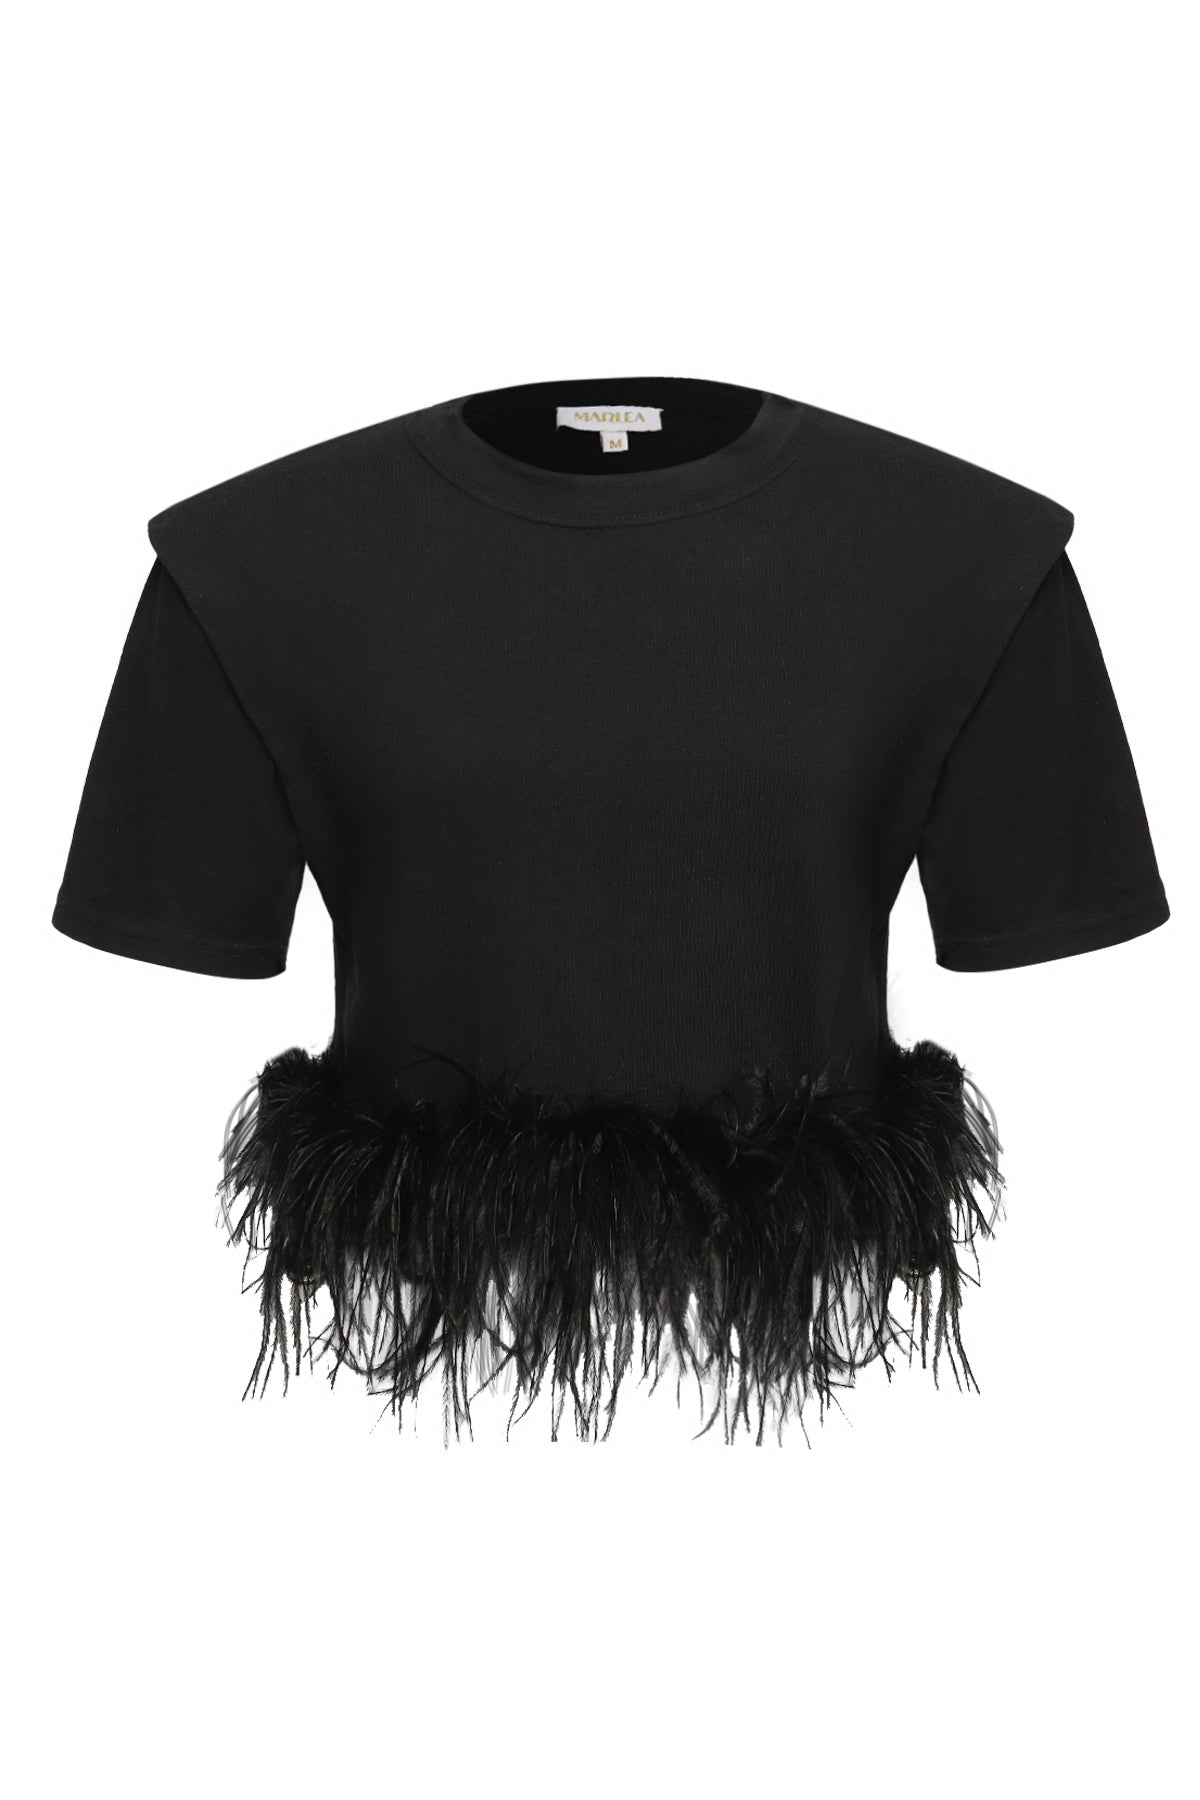 FEATHERED T-SHIRT - BLACK